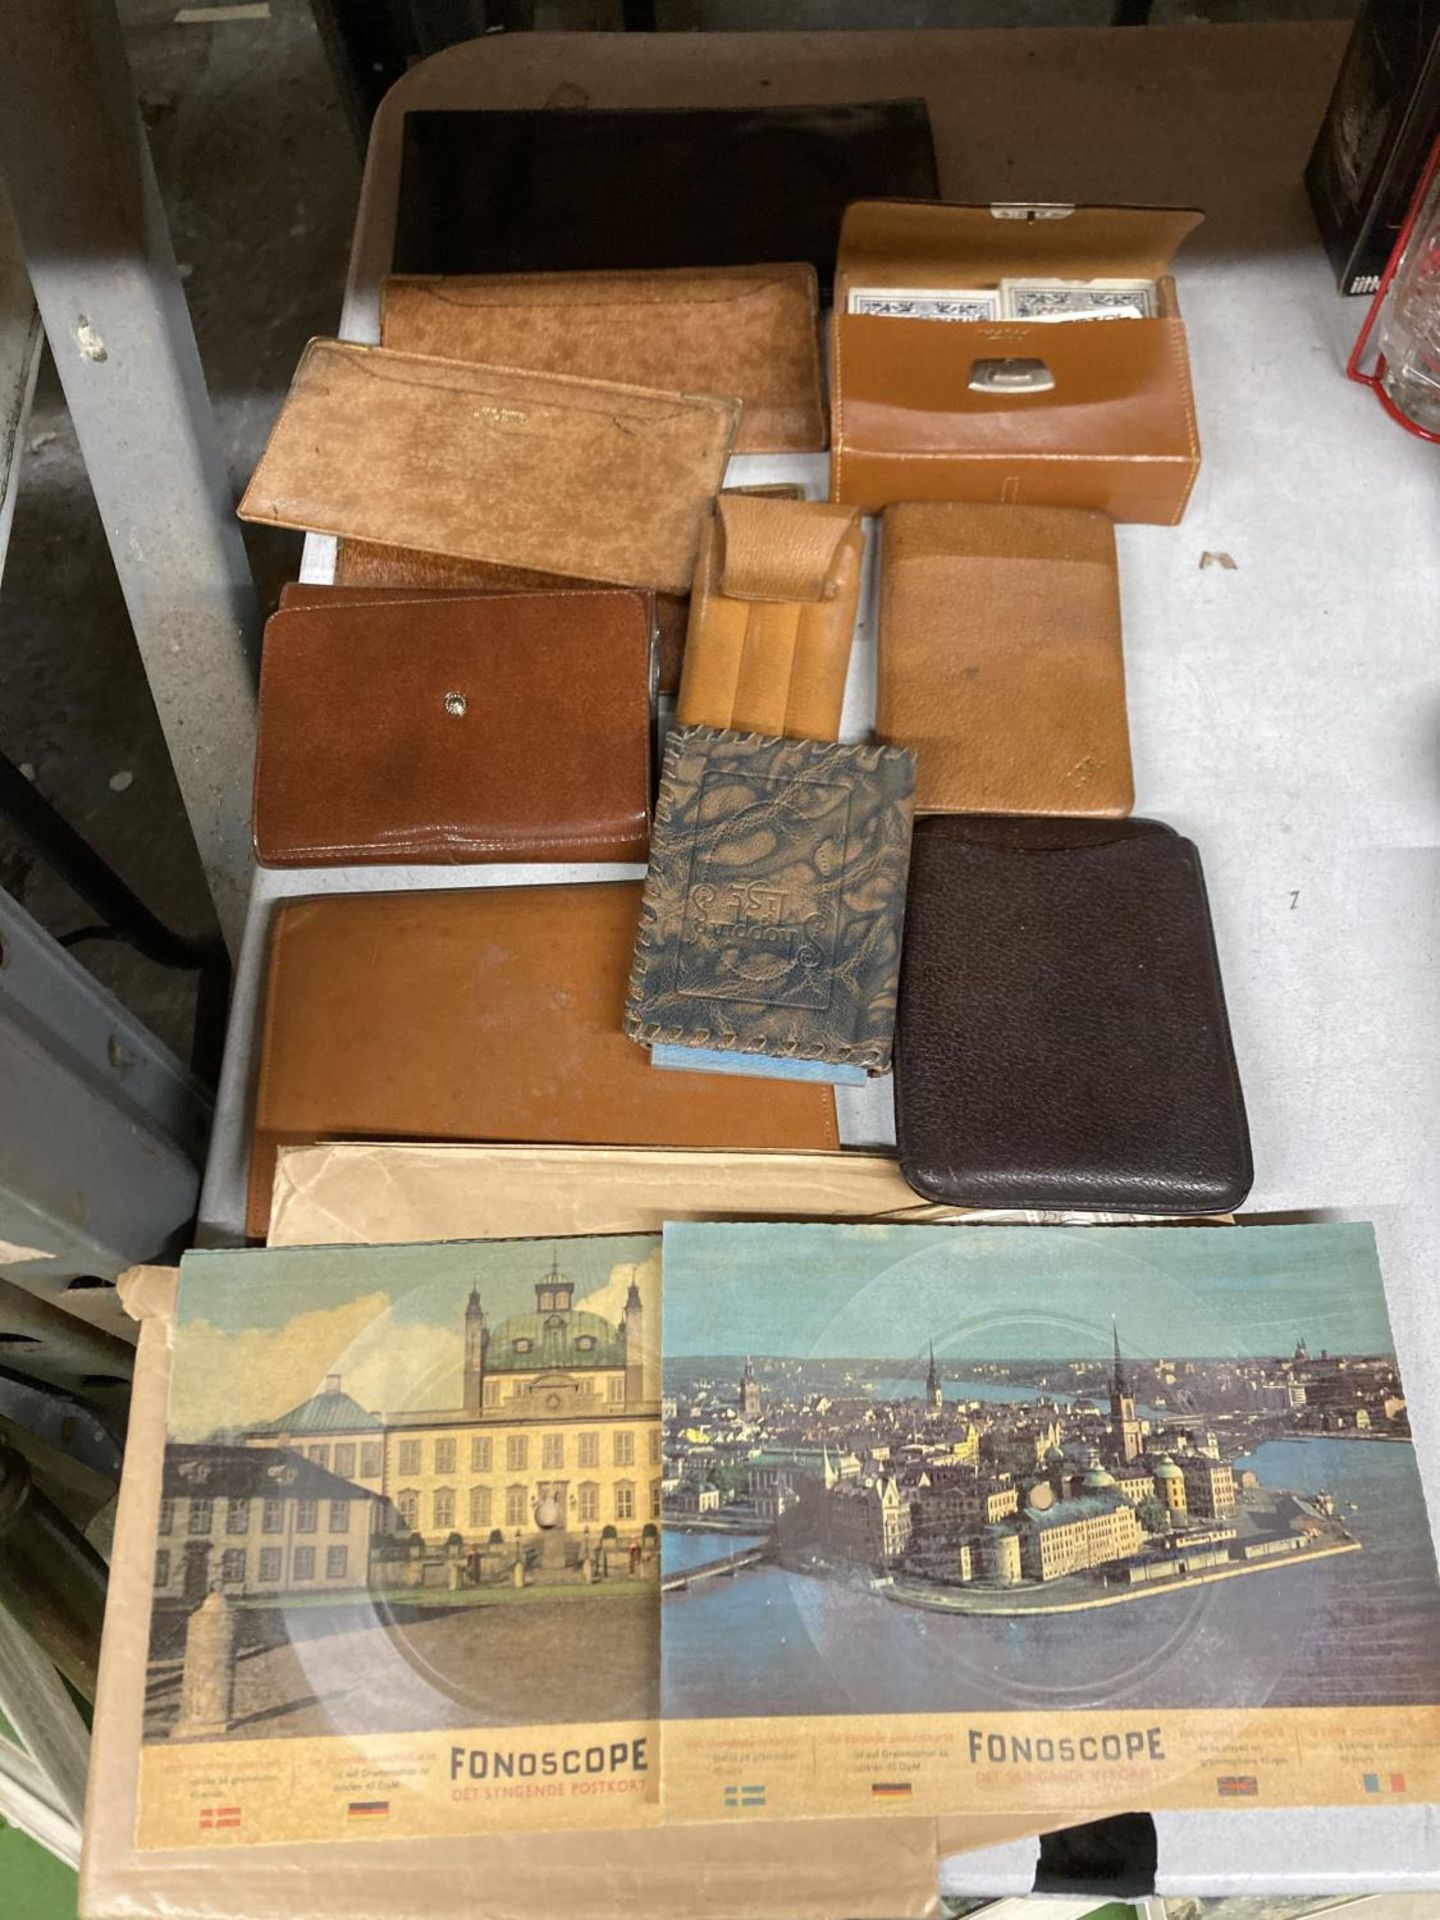 A QUANTITY OF VINTAGE LEATHER WALLETS, CASED PLAYING CARDS, 'FONDOSCOPES', ETC